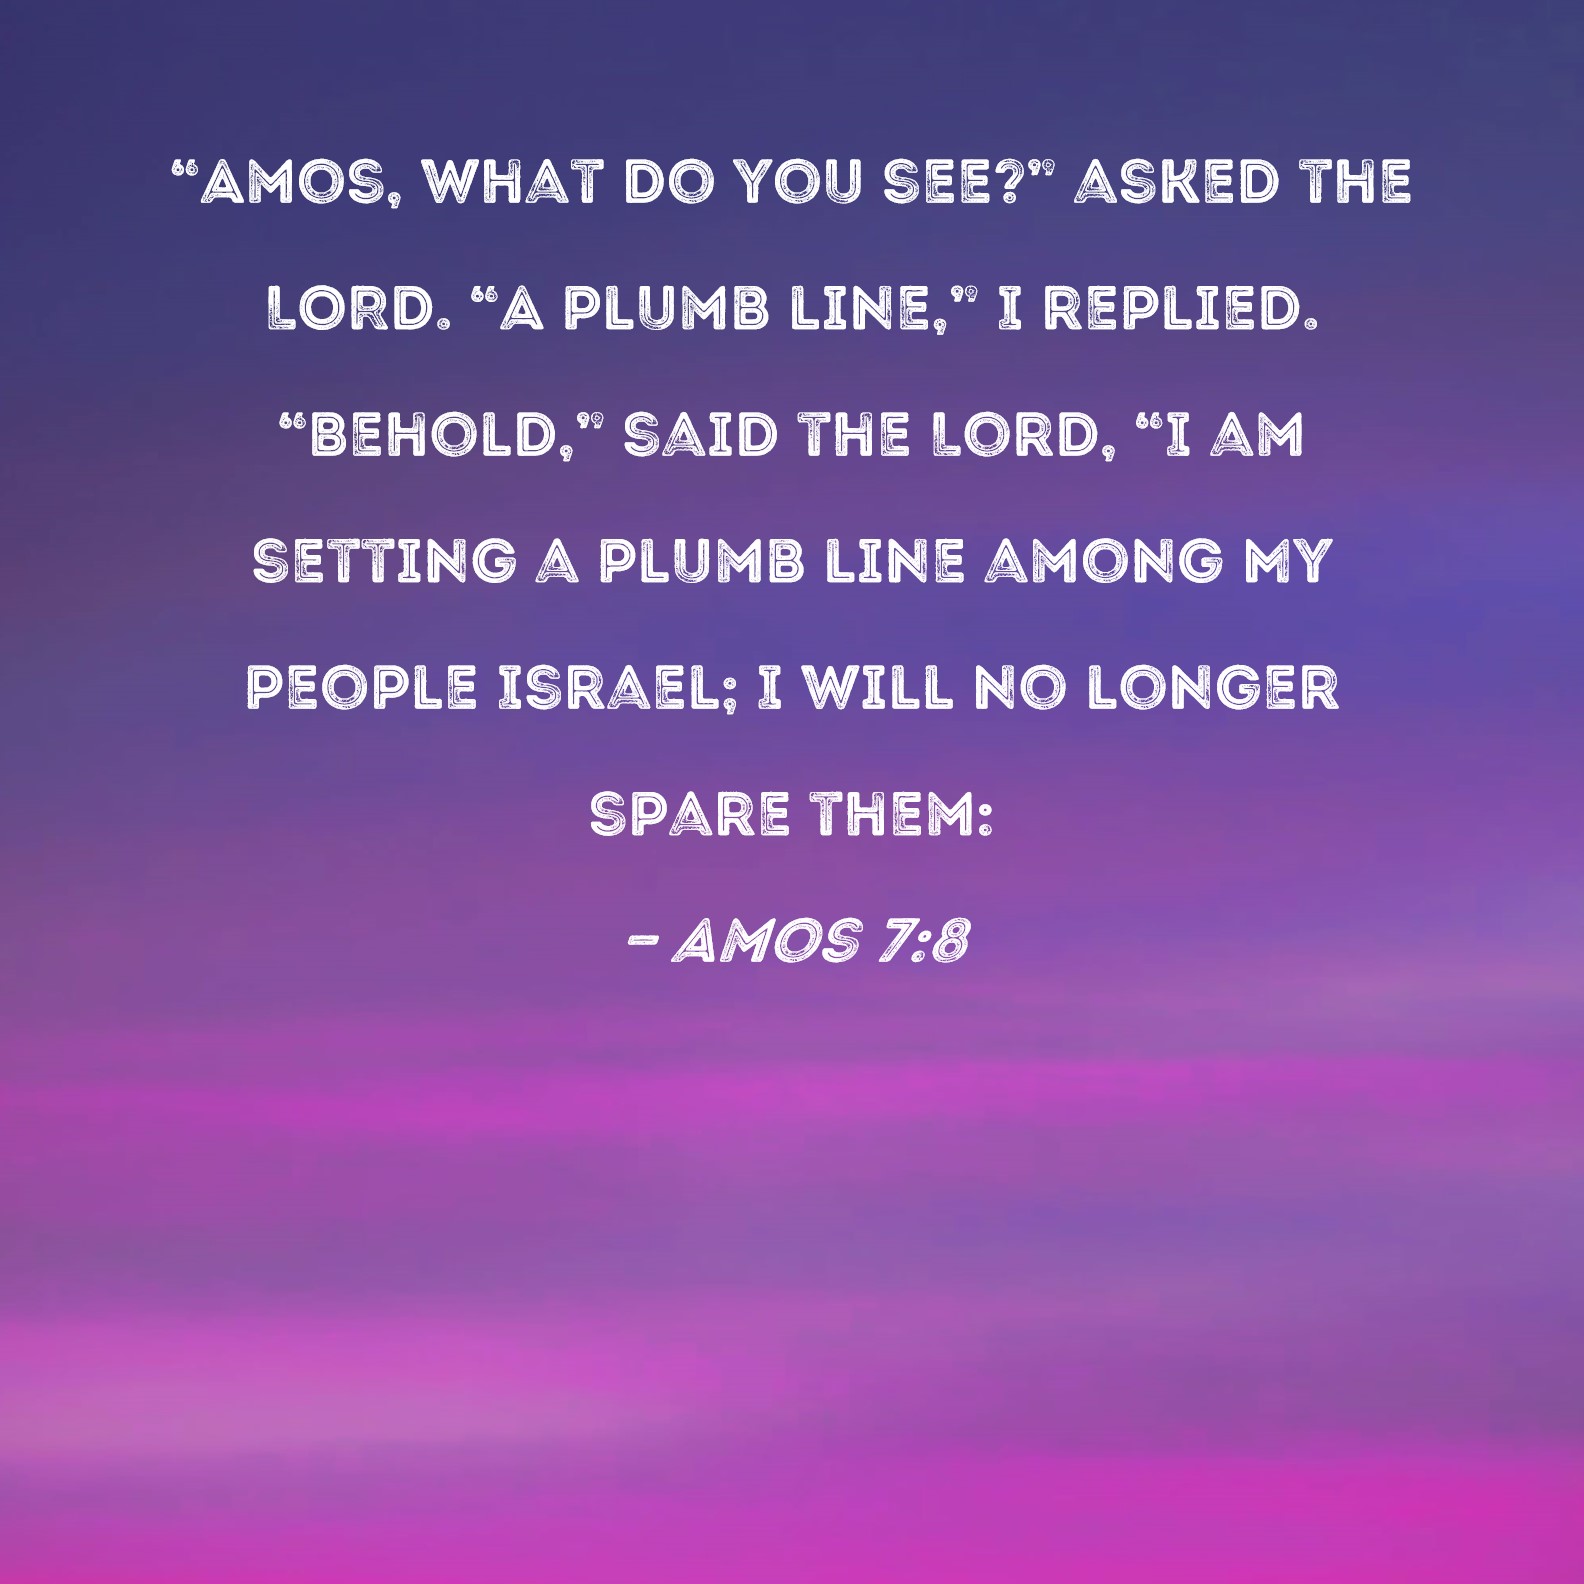 Amos 7:8 Amos, what do you see? asked the LORD. A plumb line